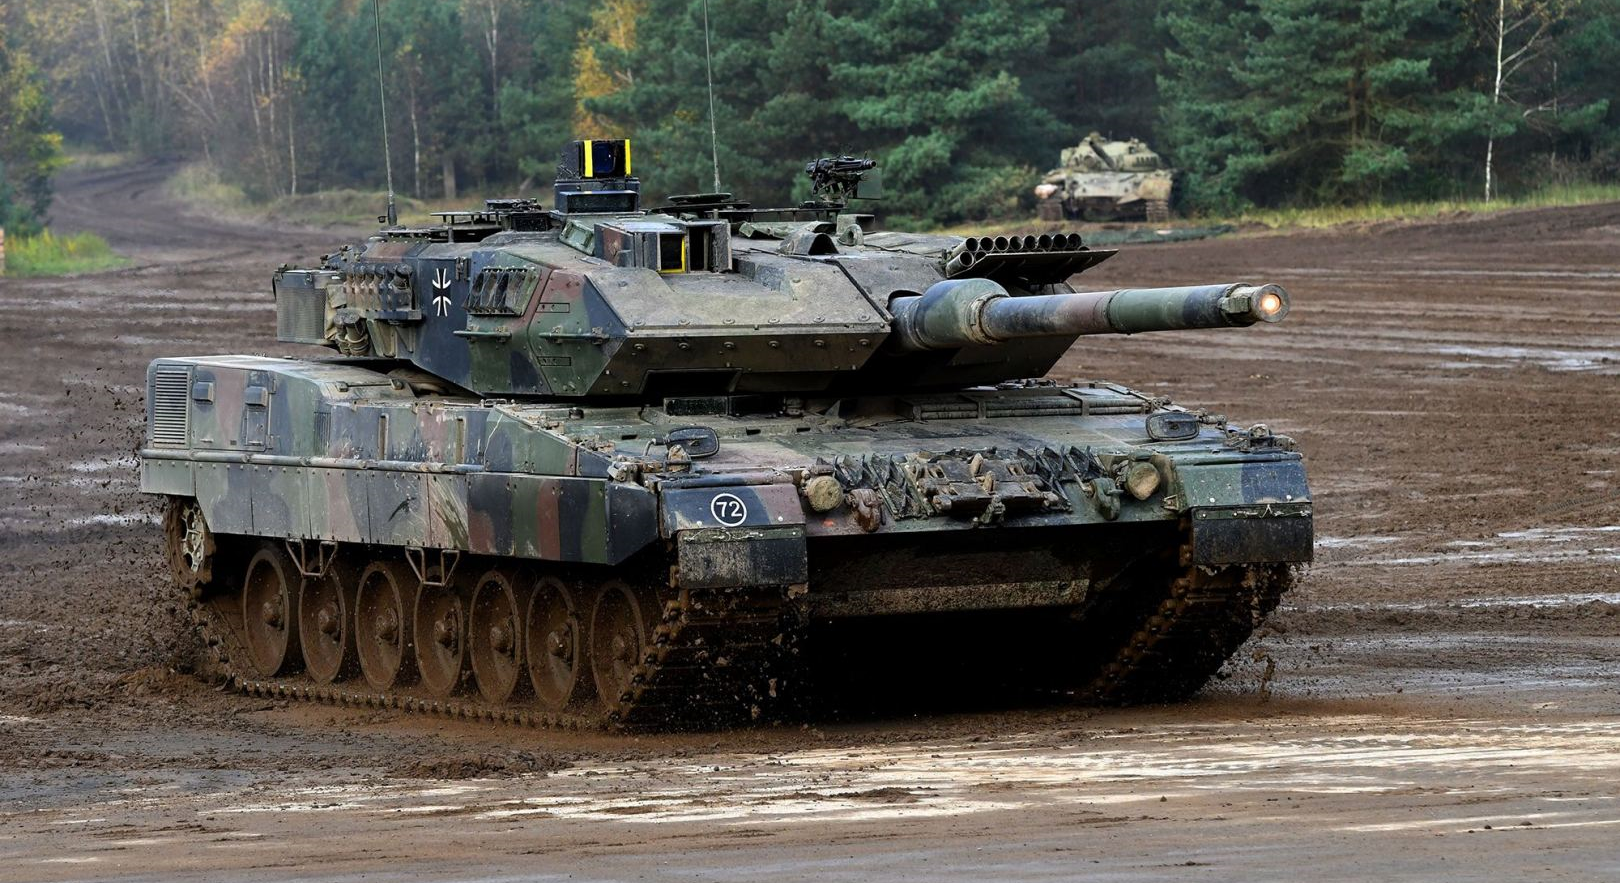 Spain to send 20 armoured personal carriers, 4 Leopard tanks to Ukraine